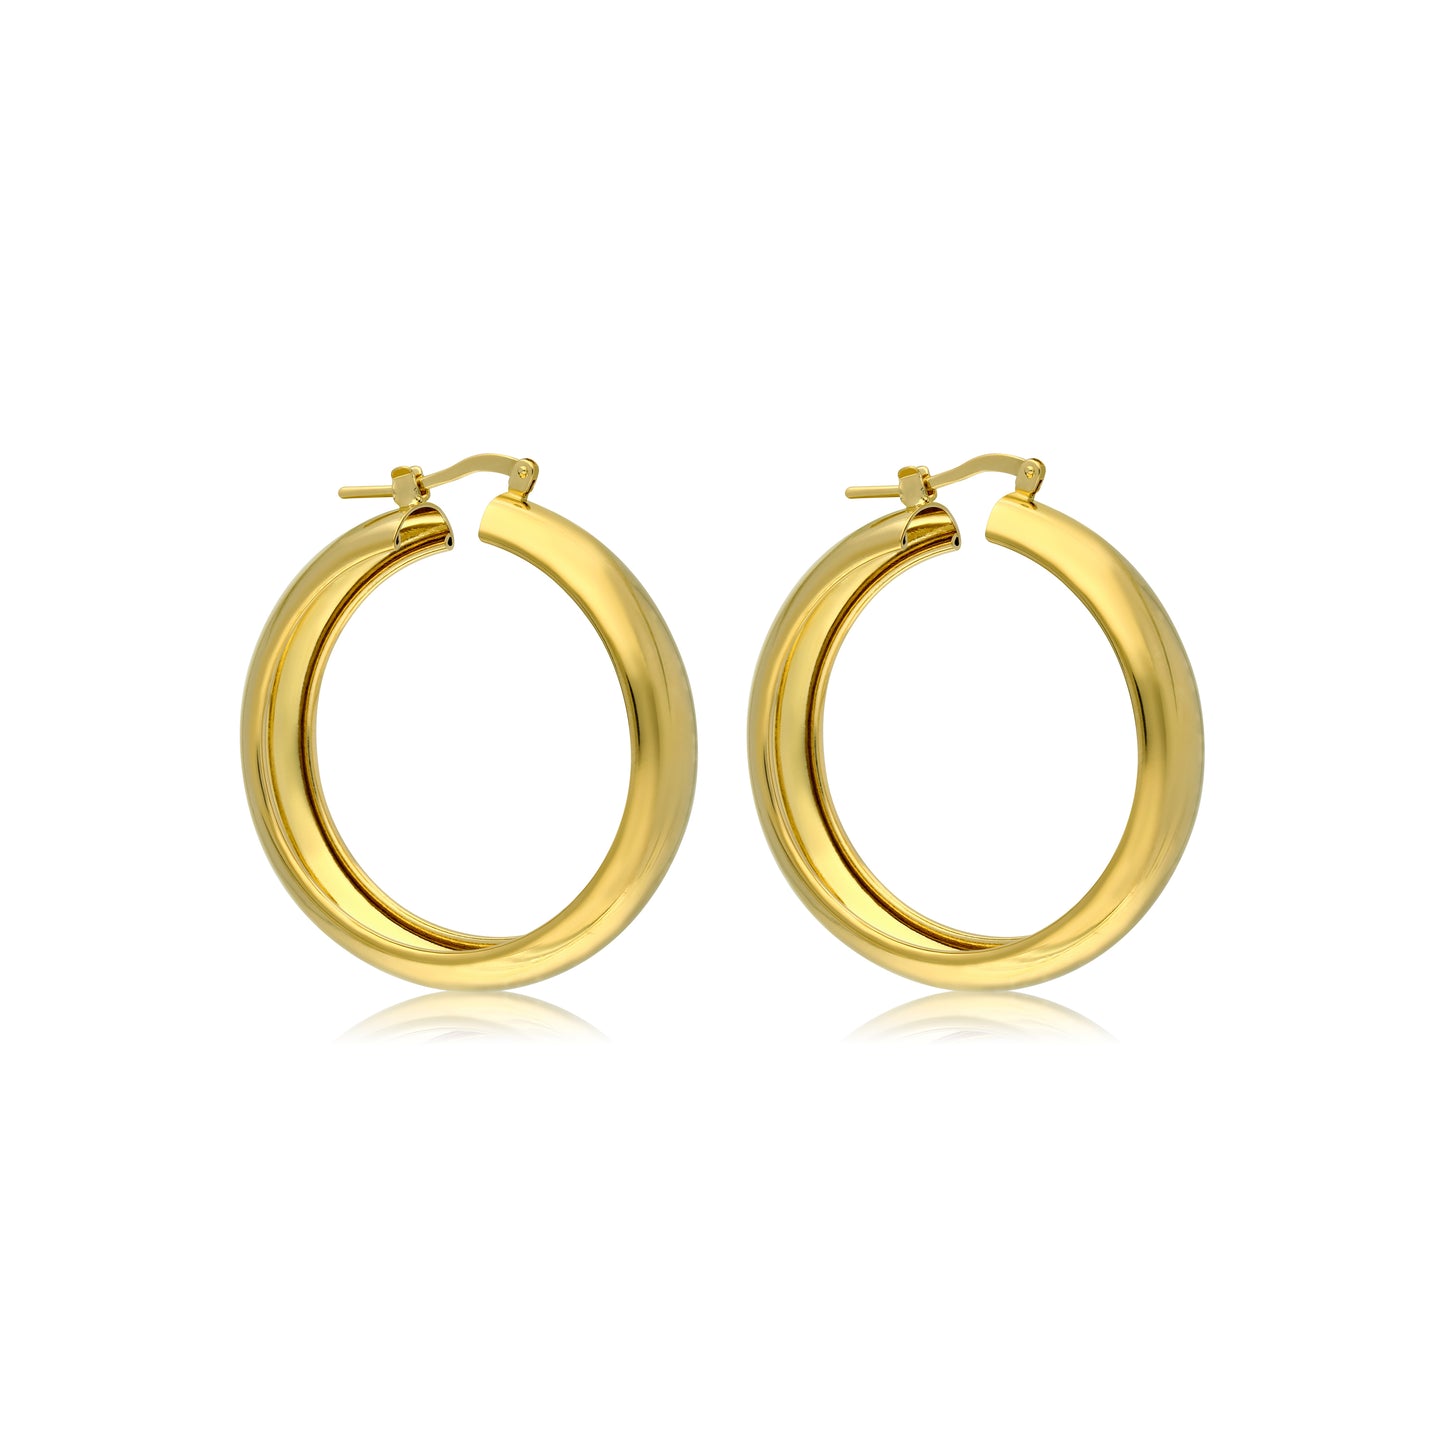 18kt Gold Plated Yellow Polished Wedding Band Hoop Earring